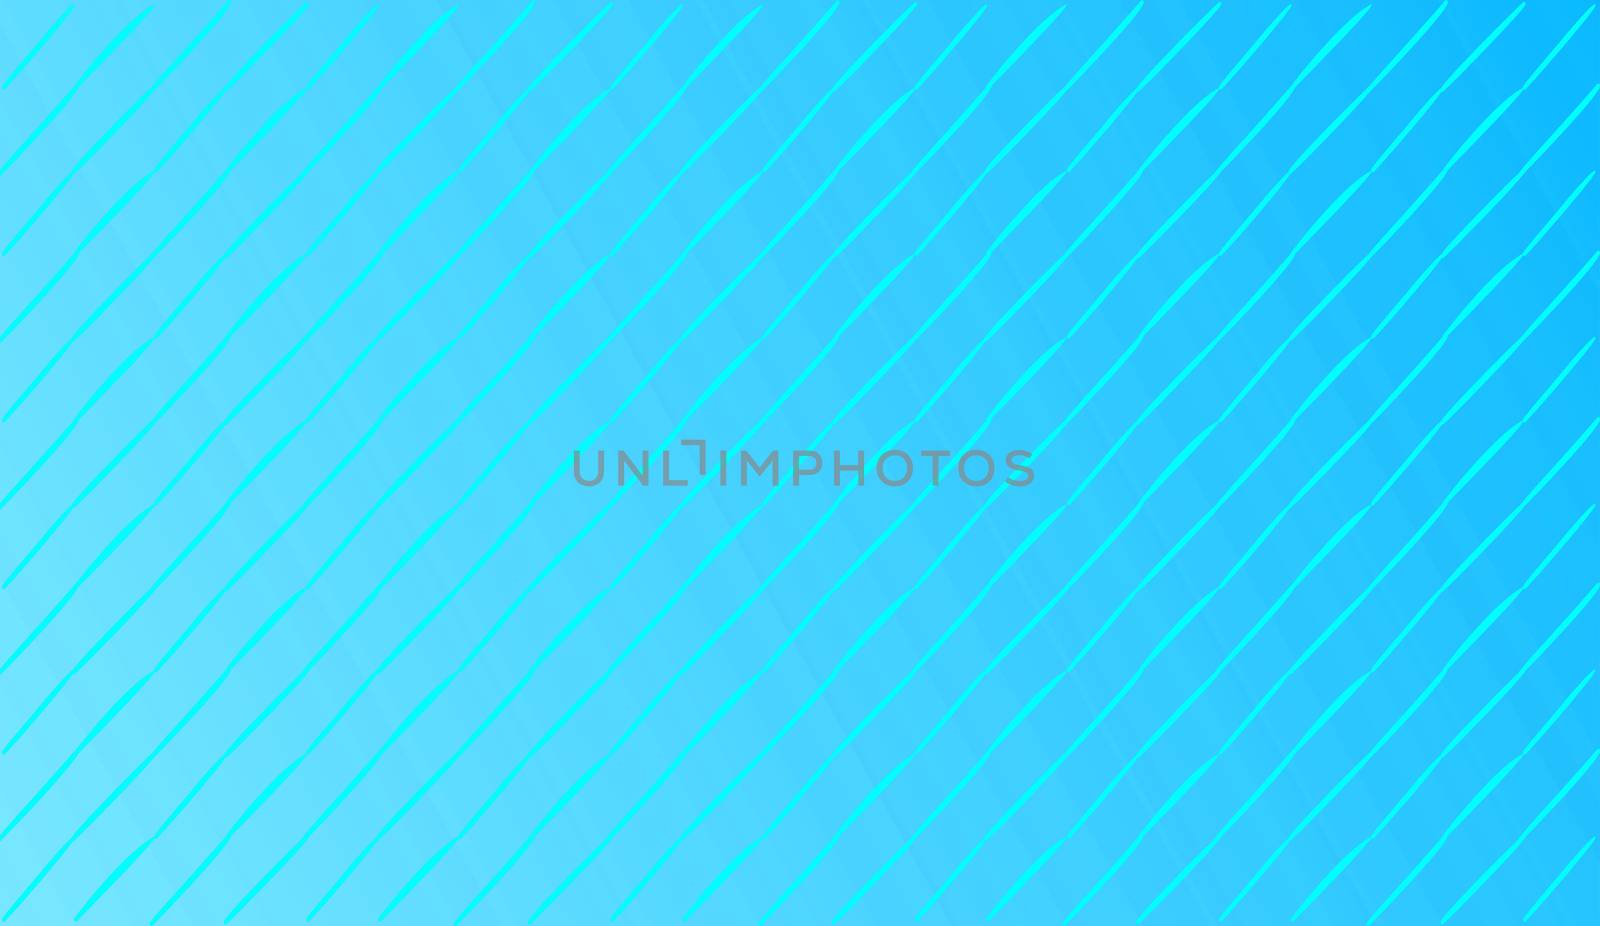 abstract background with diagonal blue cartoon lines